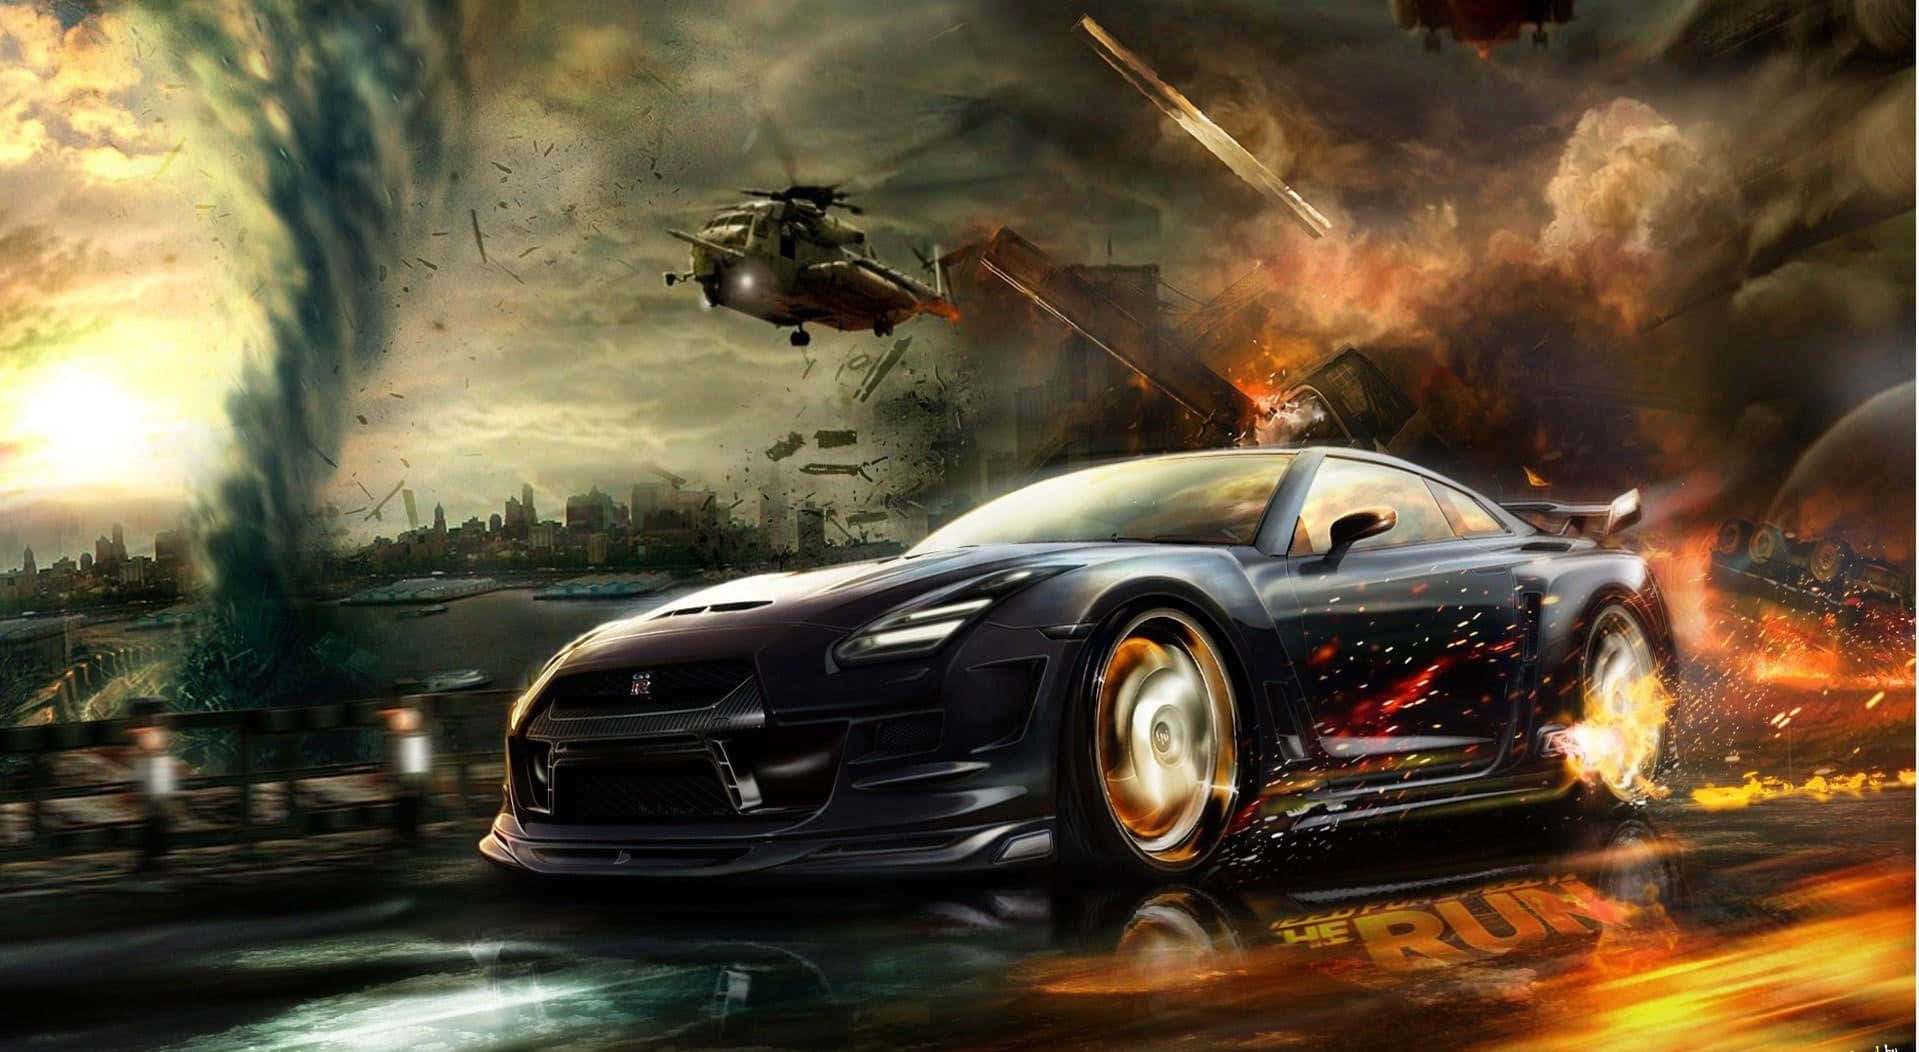 Step Into The Thrilling Racing World of Need For Speed Games Wallpaper